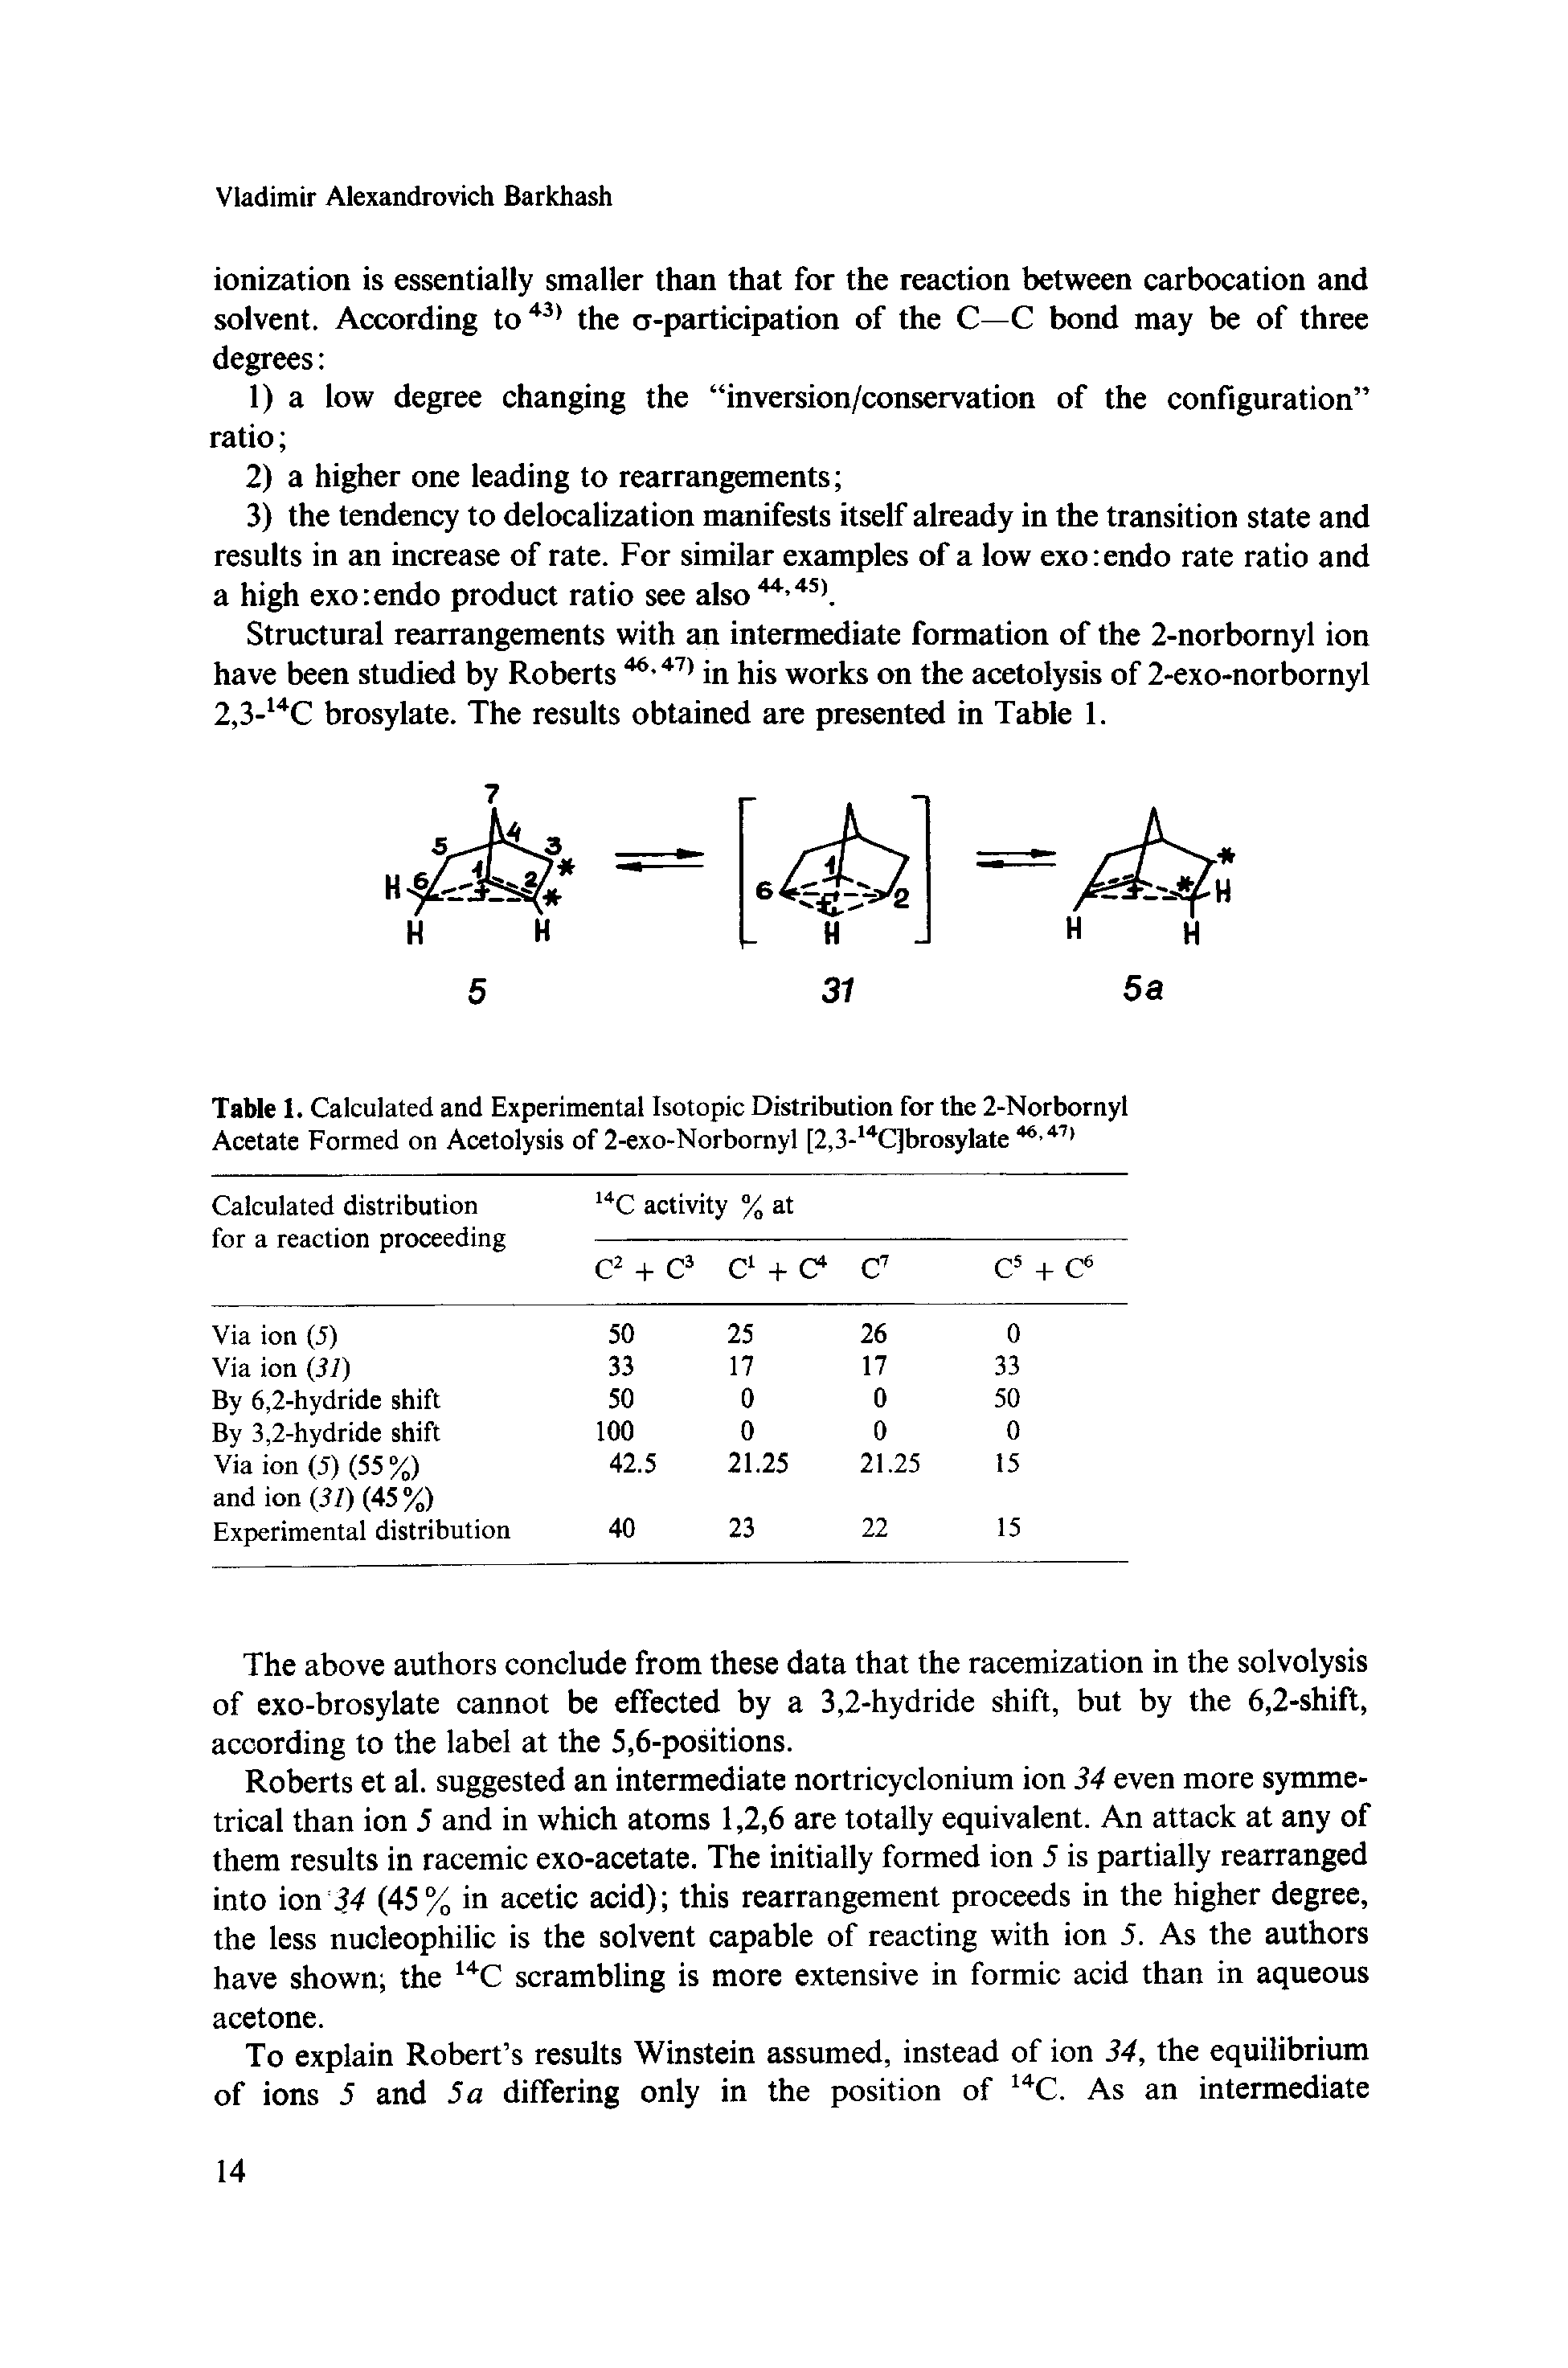 Table 1. Calculated and Experimental Isotopic Distribution for the 2-Norbornyl Acetate Formed on Acetolysis of 2-exo-Norbomyl [2,3- C]brosylate ...